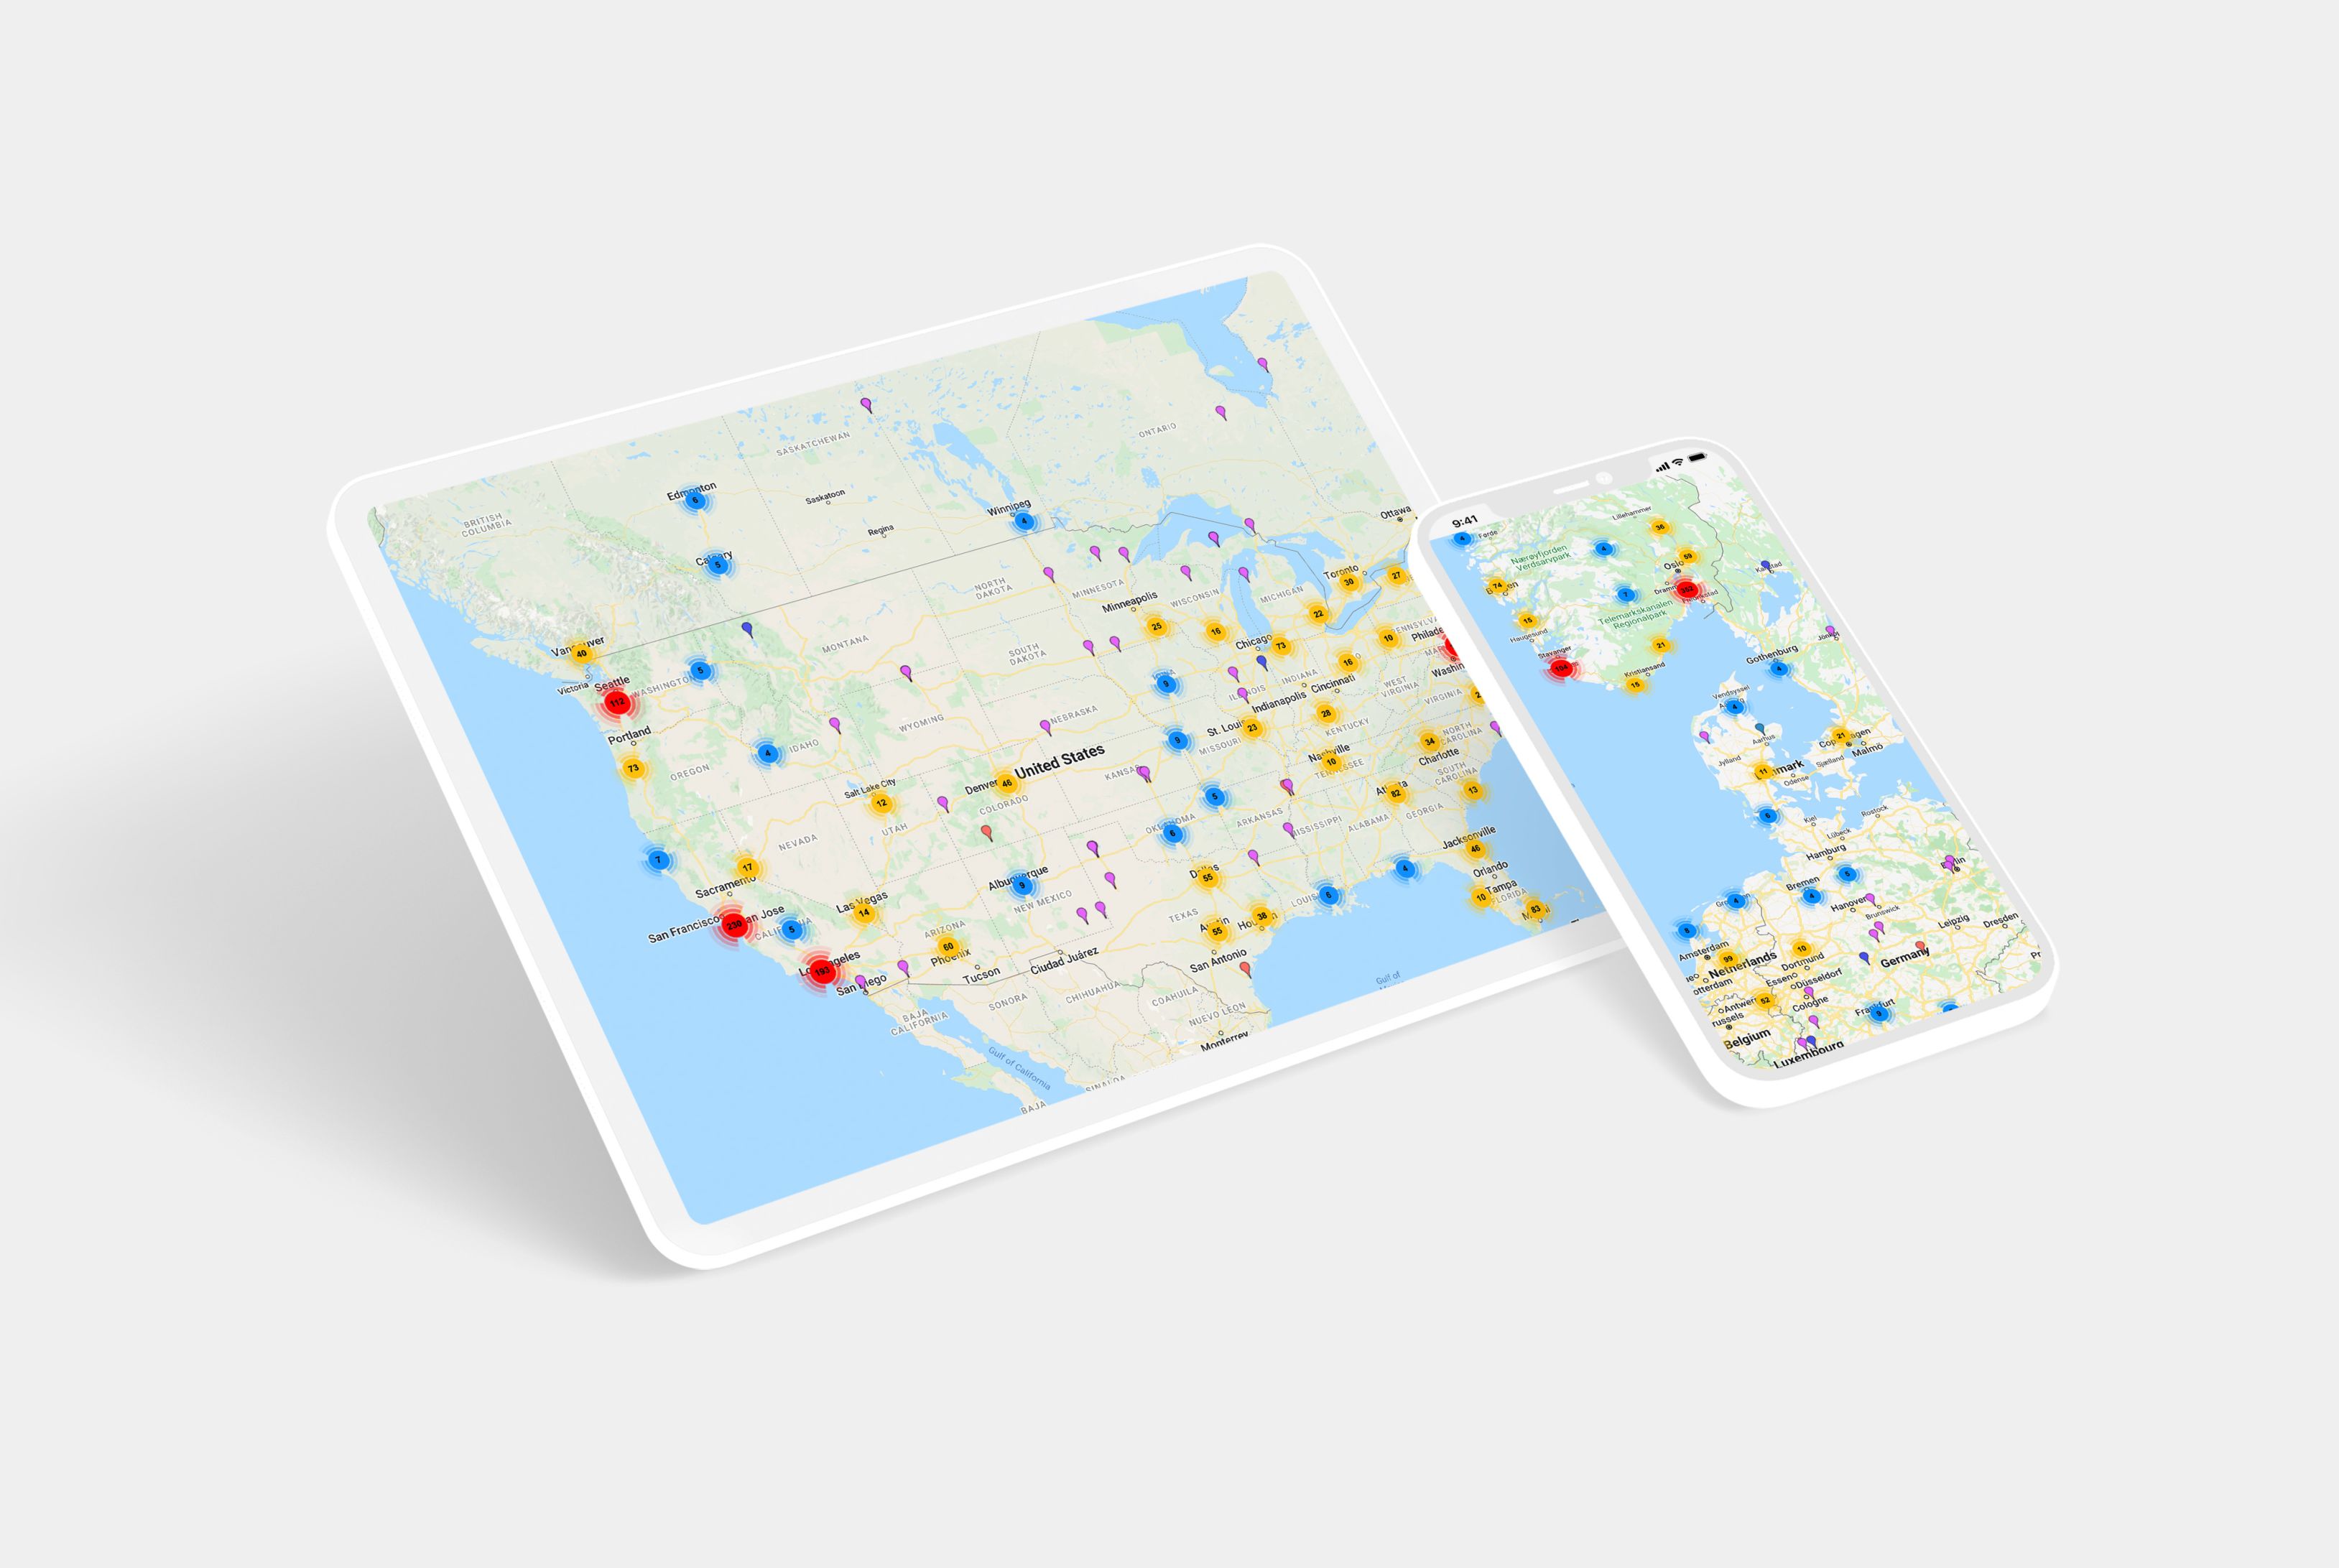 10 Tools To Create Interactive Maps 0164